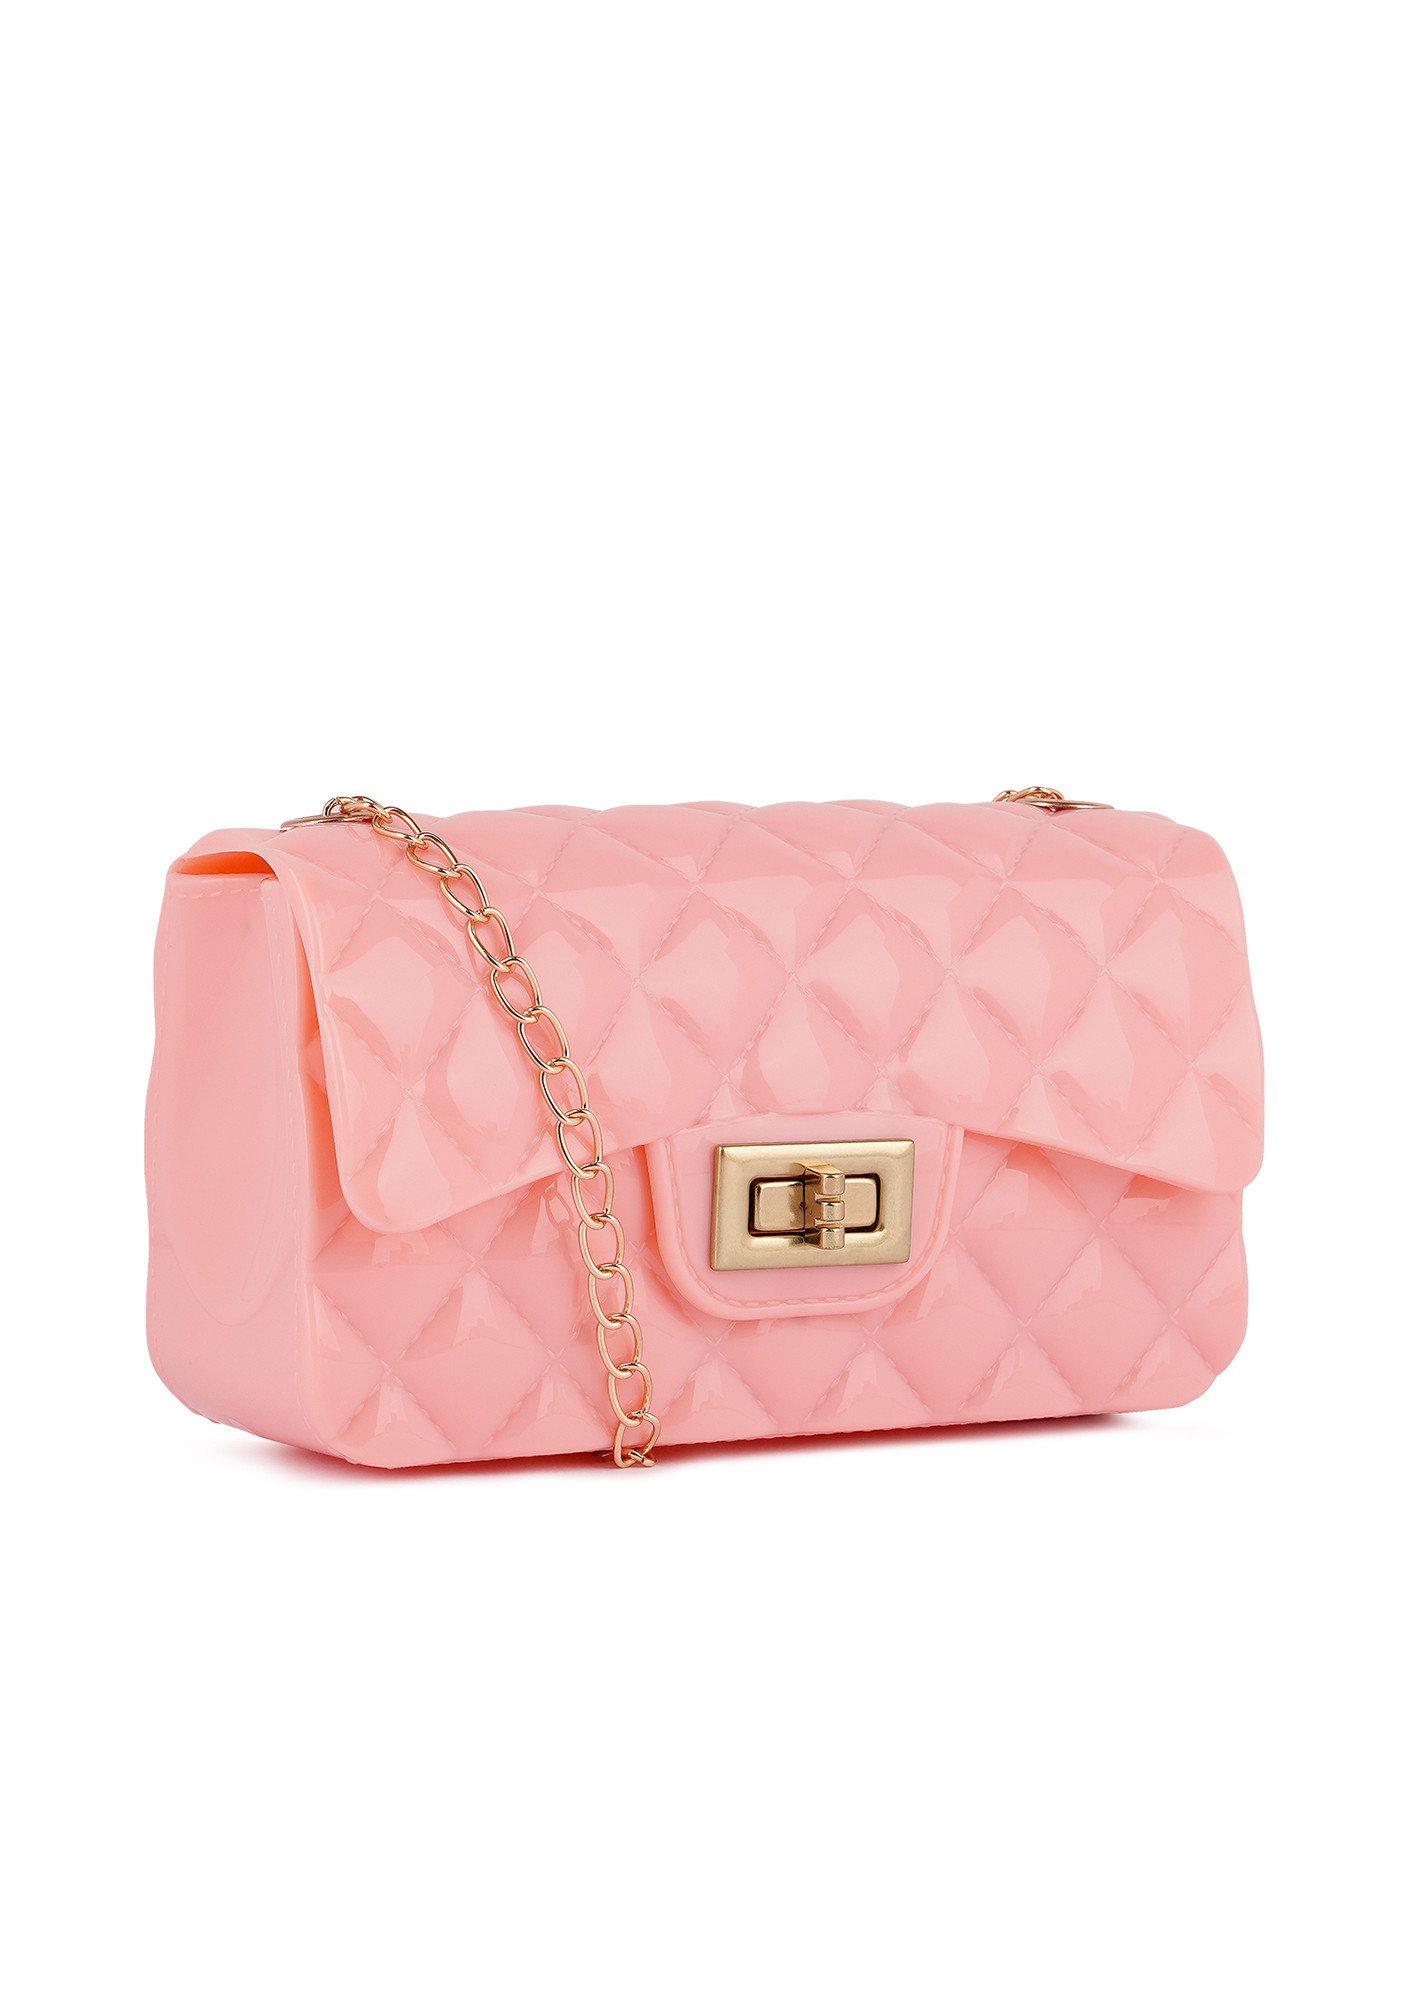 London Rag - Jelly Quilted Rectangular Sling Bag in Pink